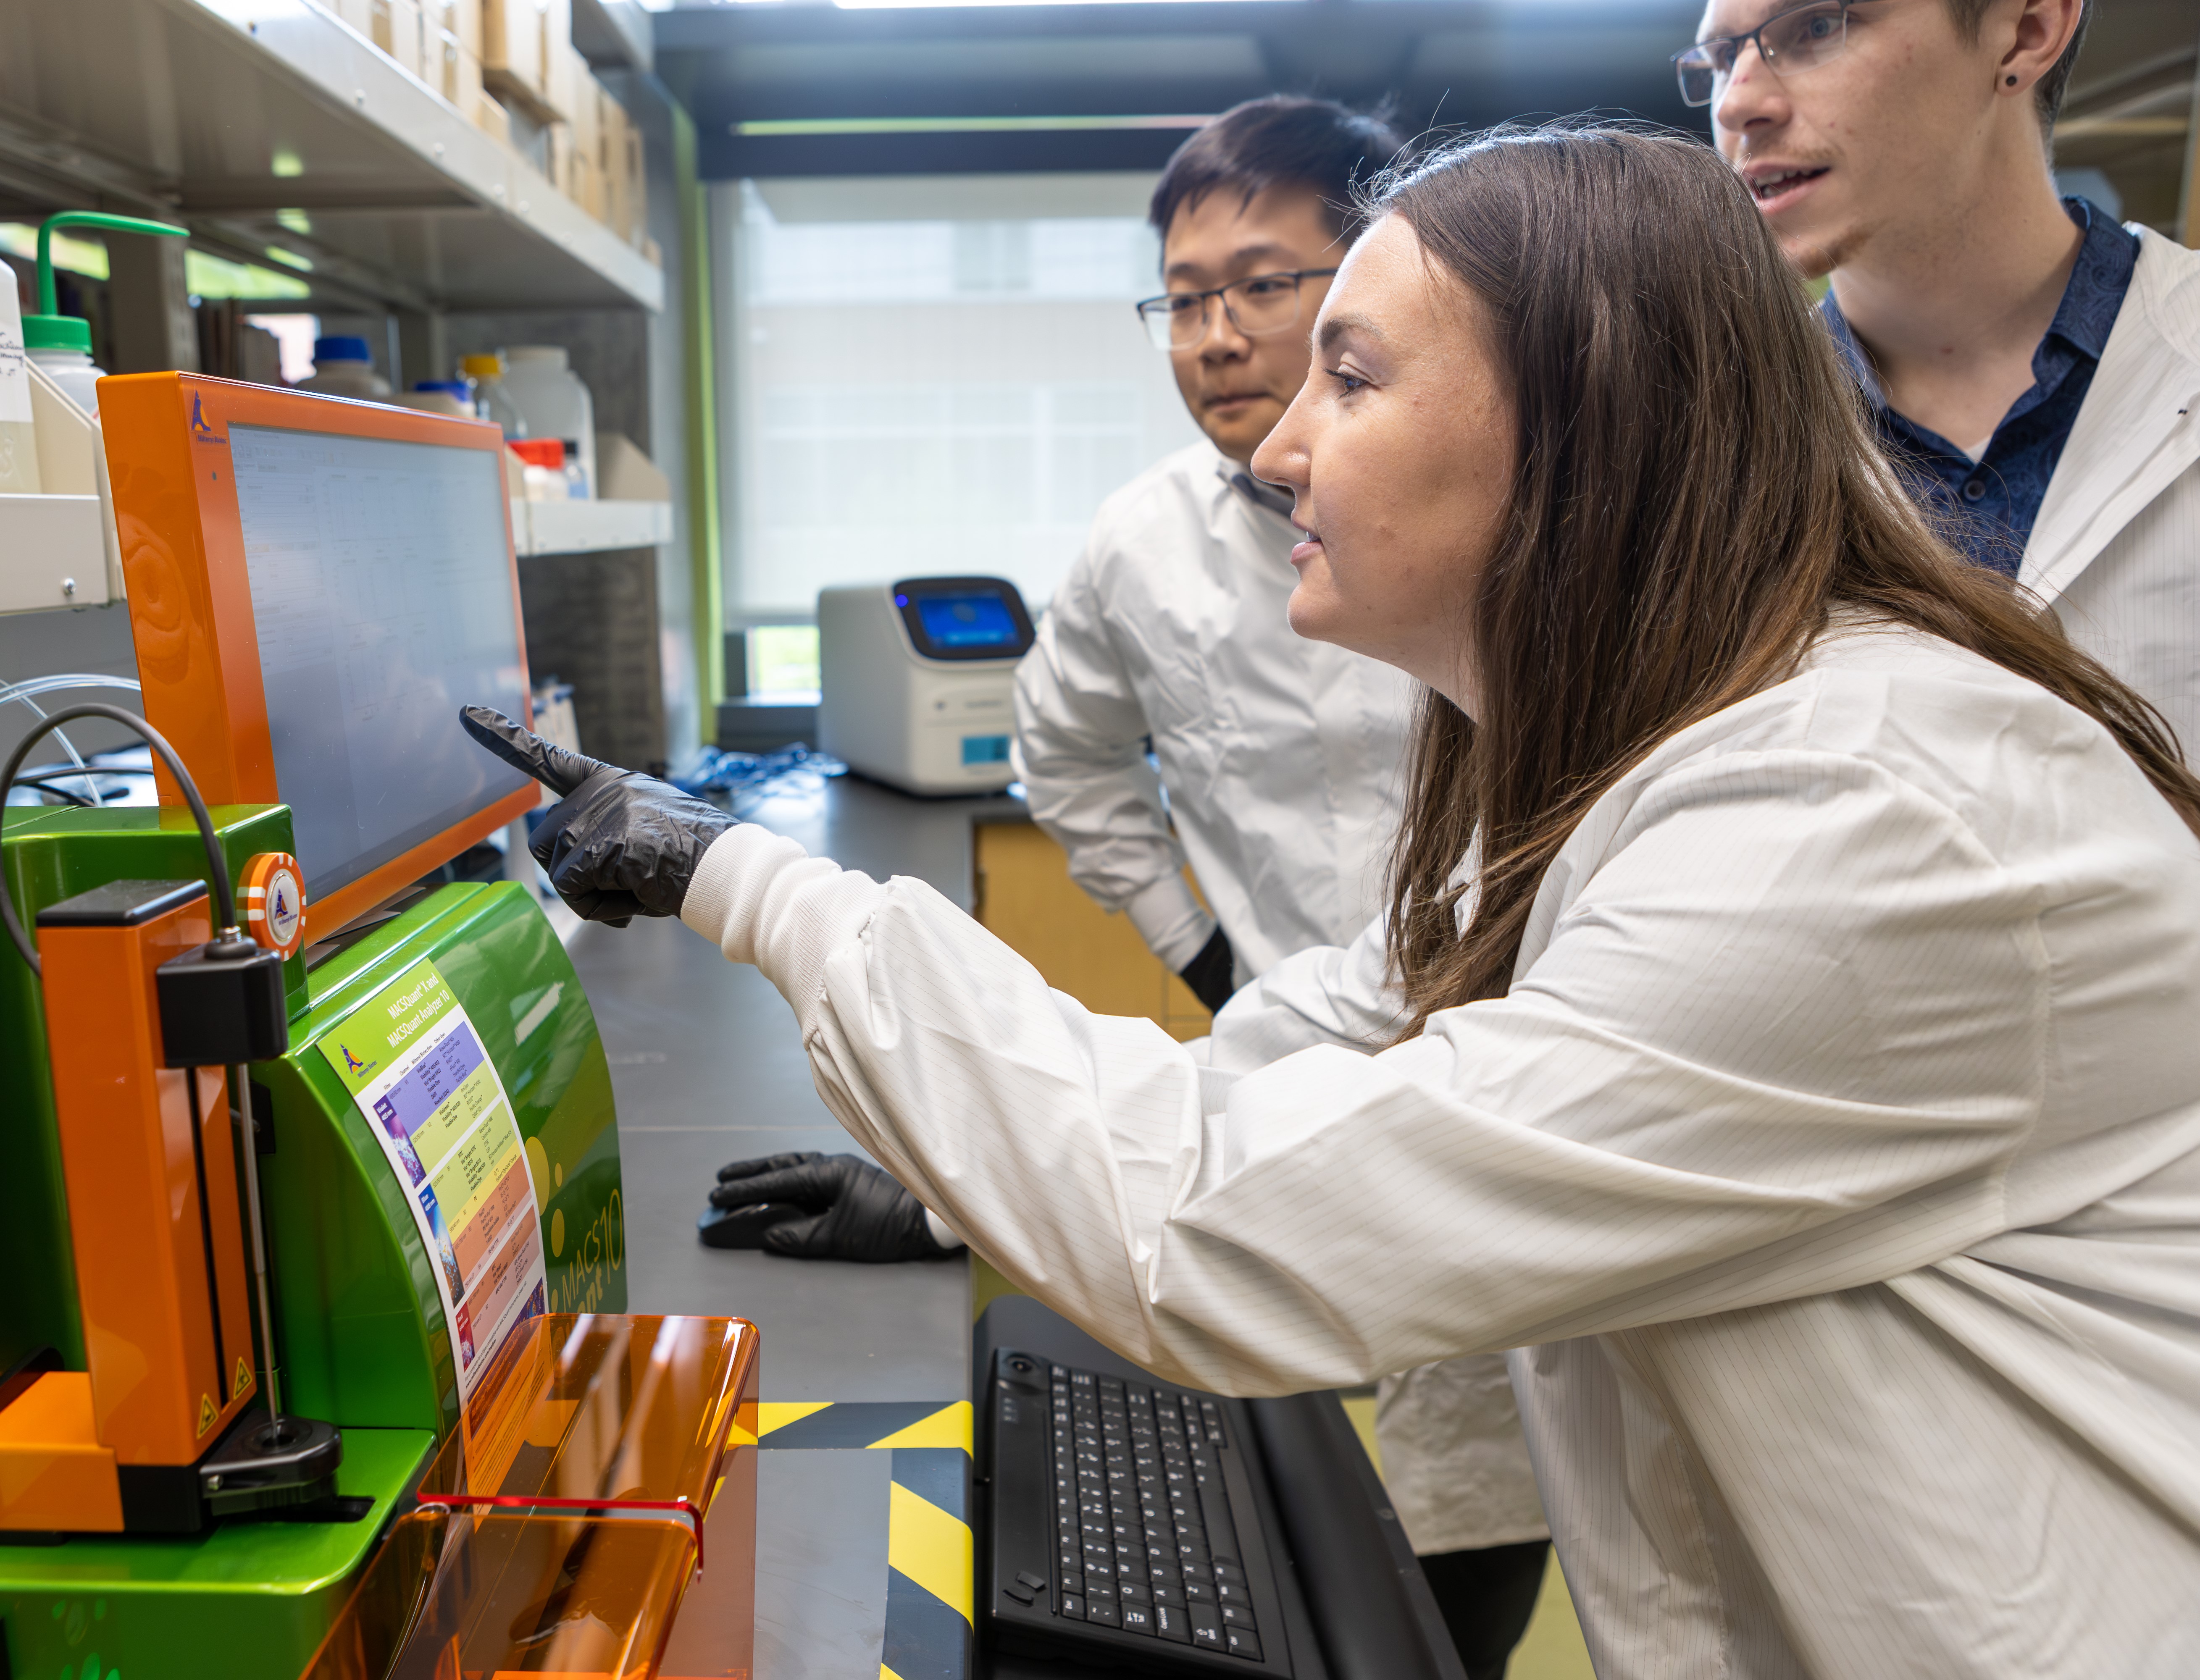 Three pharmacy students examine the results of lab work on a computer monitor.